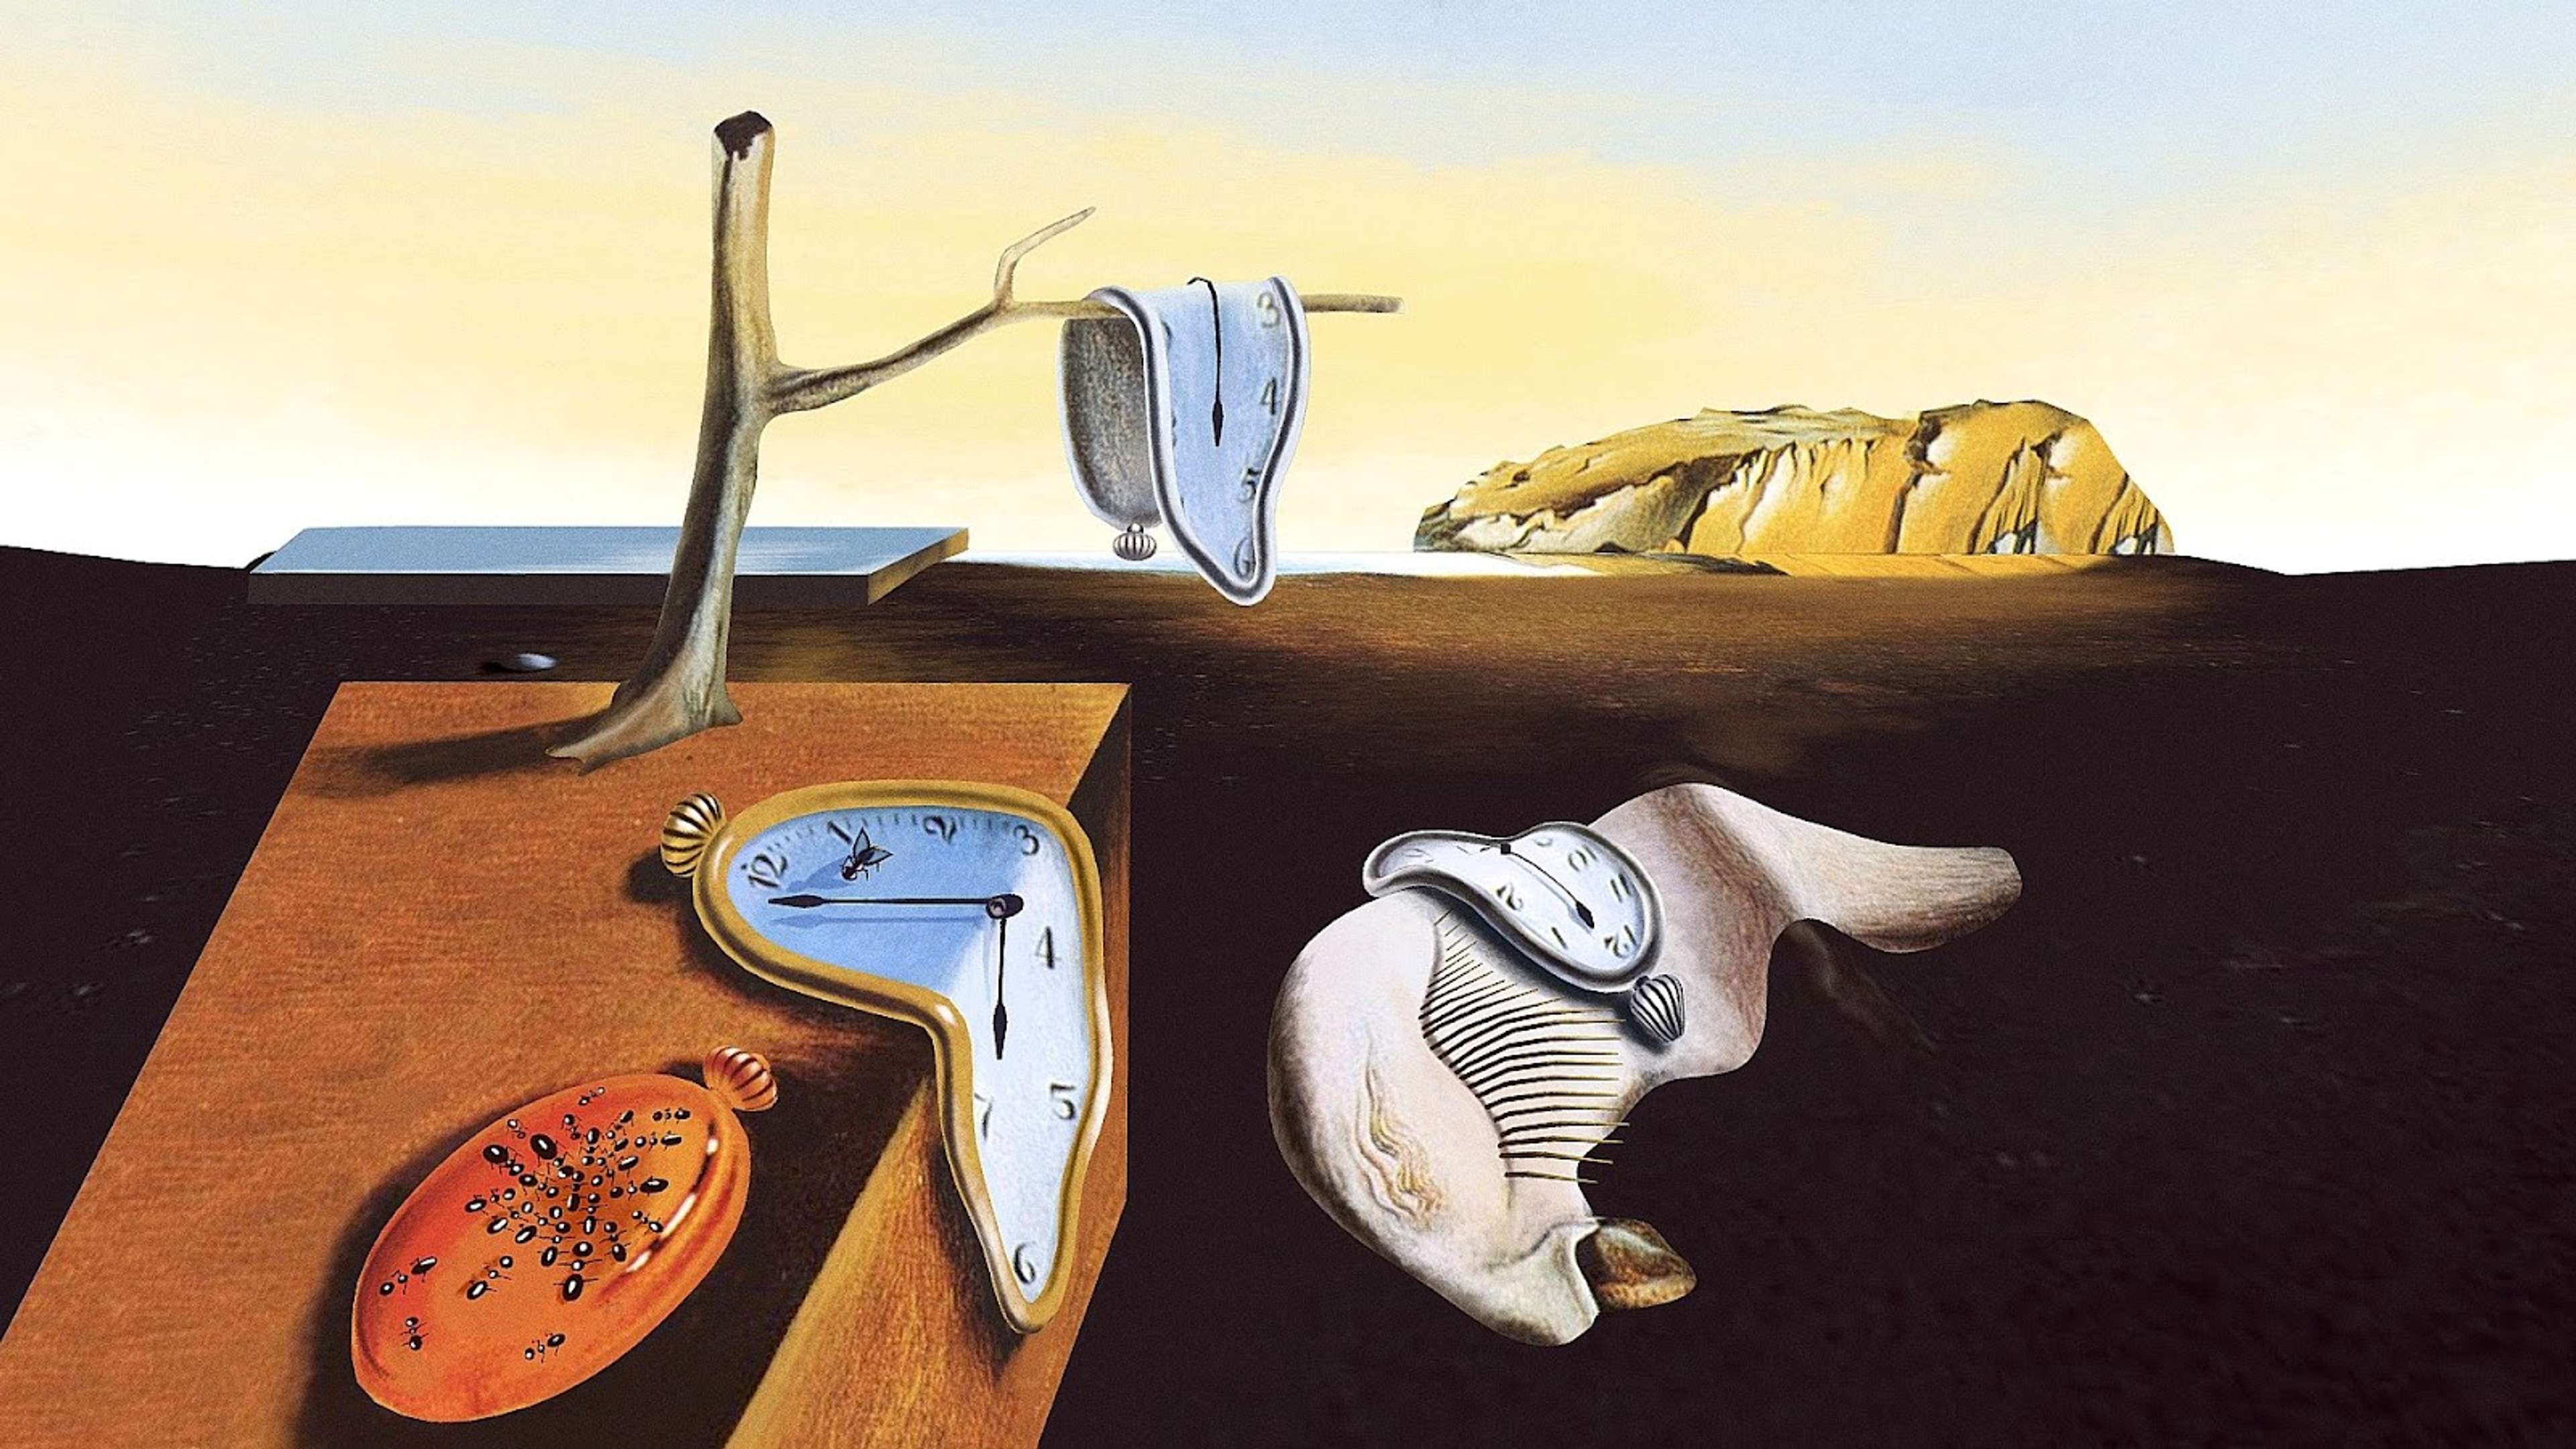 An image of the painting The Persistence Of Memory by Salvador Dalí. It shows a scene in the desert, with several clocks that appear to be melting.